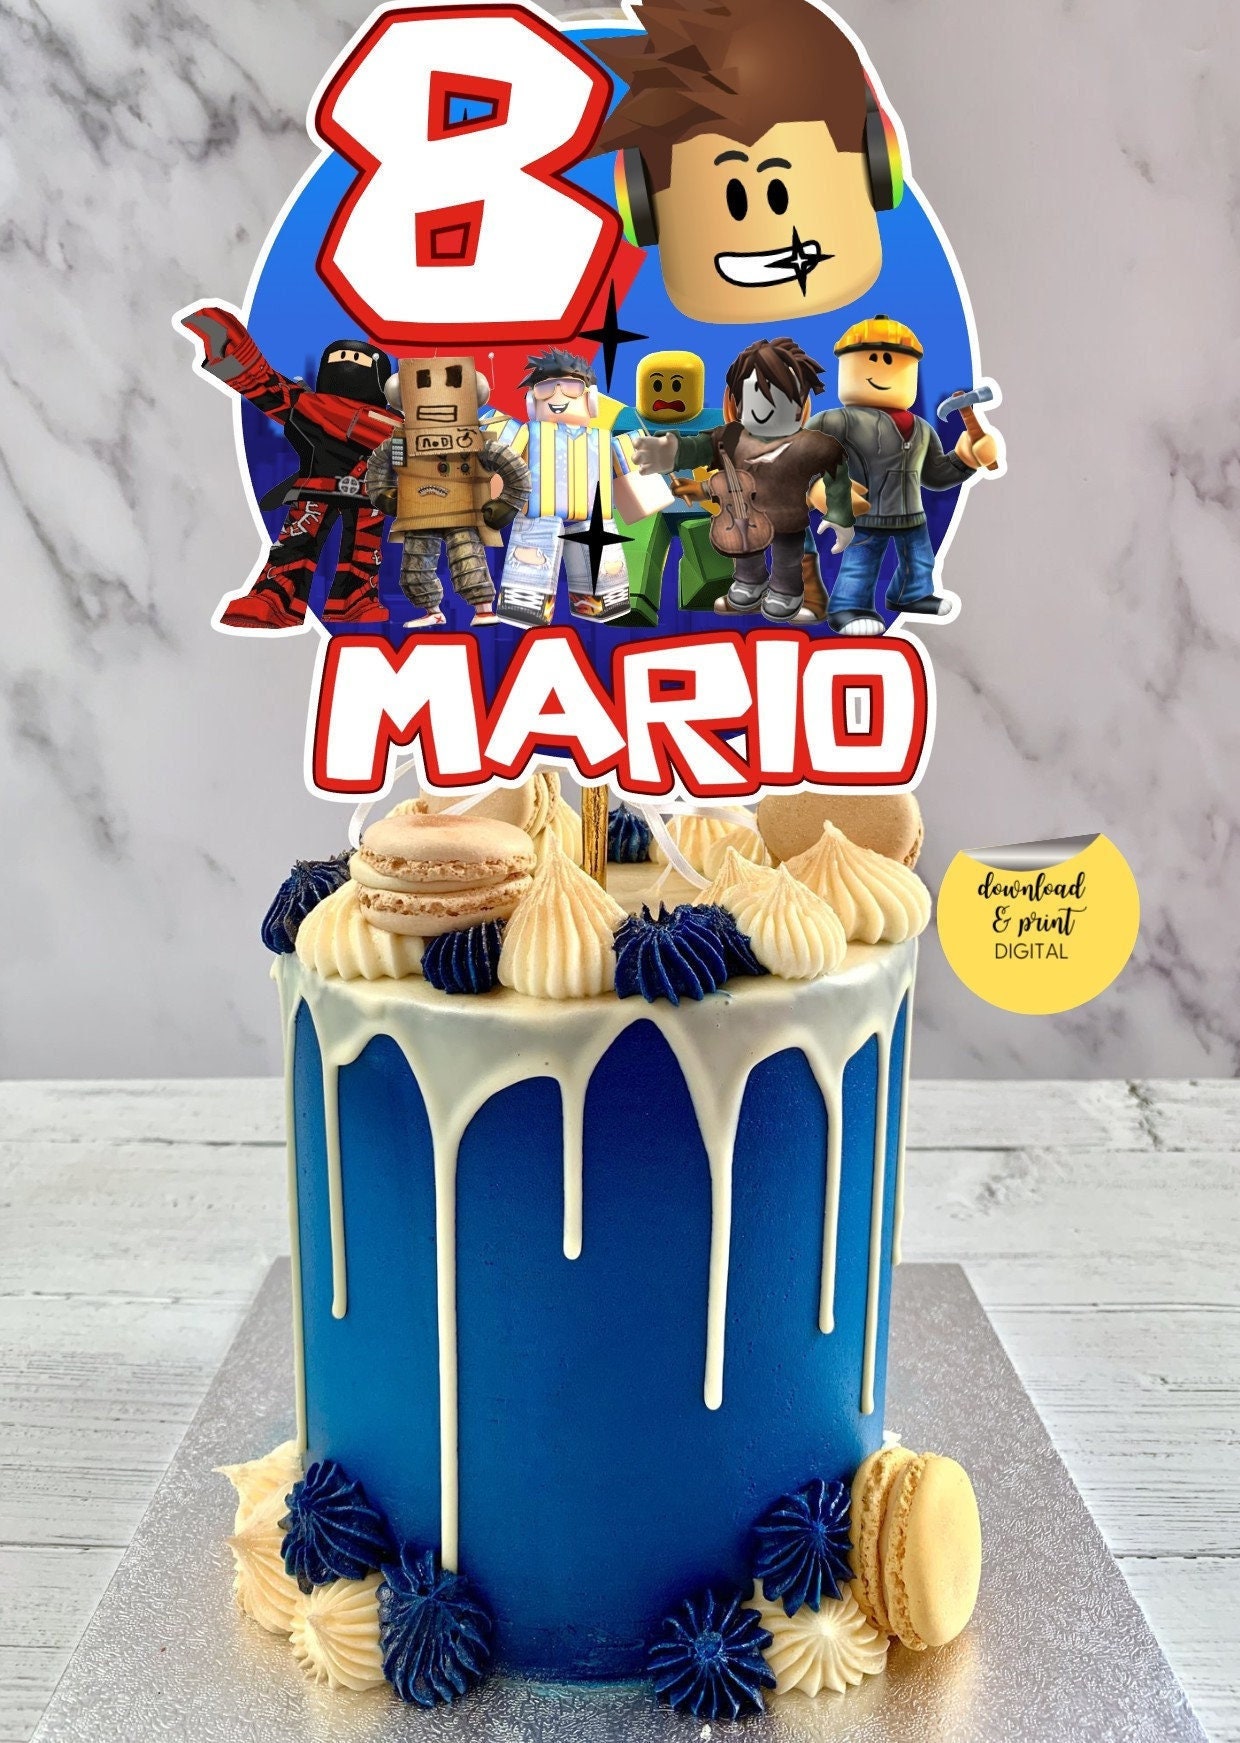 Iced and Sliced - Roblox cake with builder man on top!